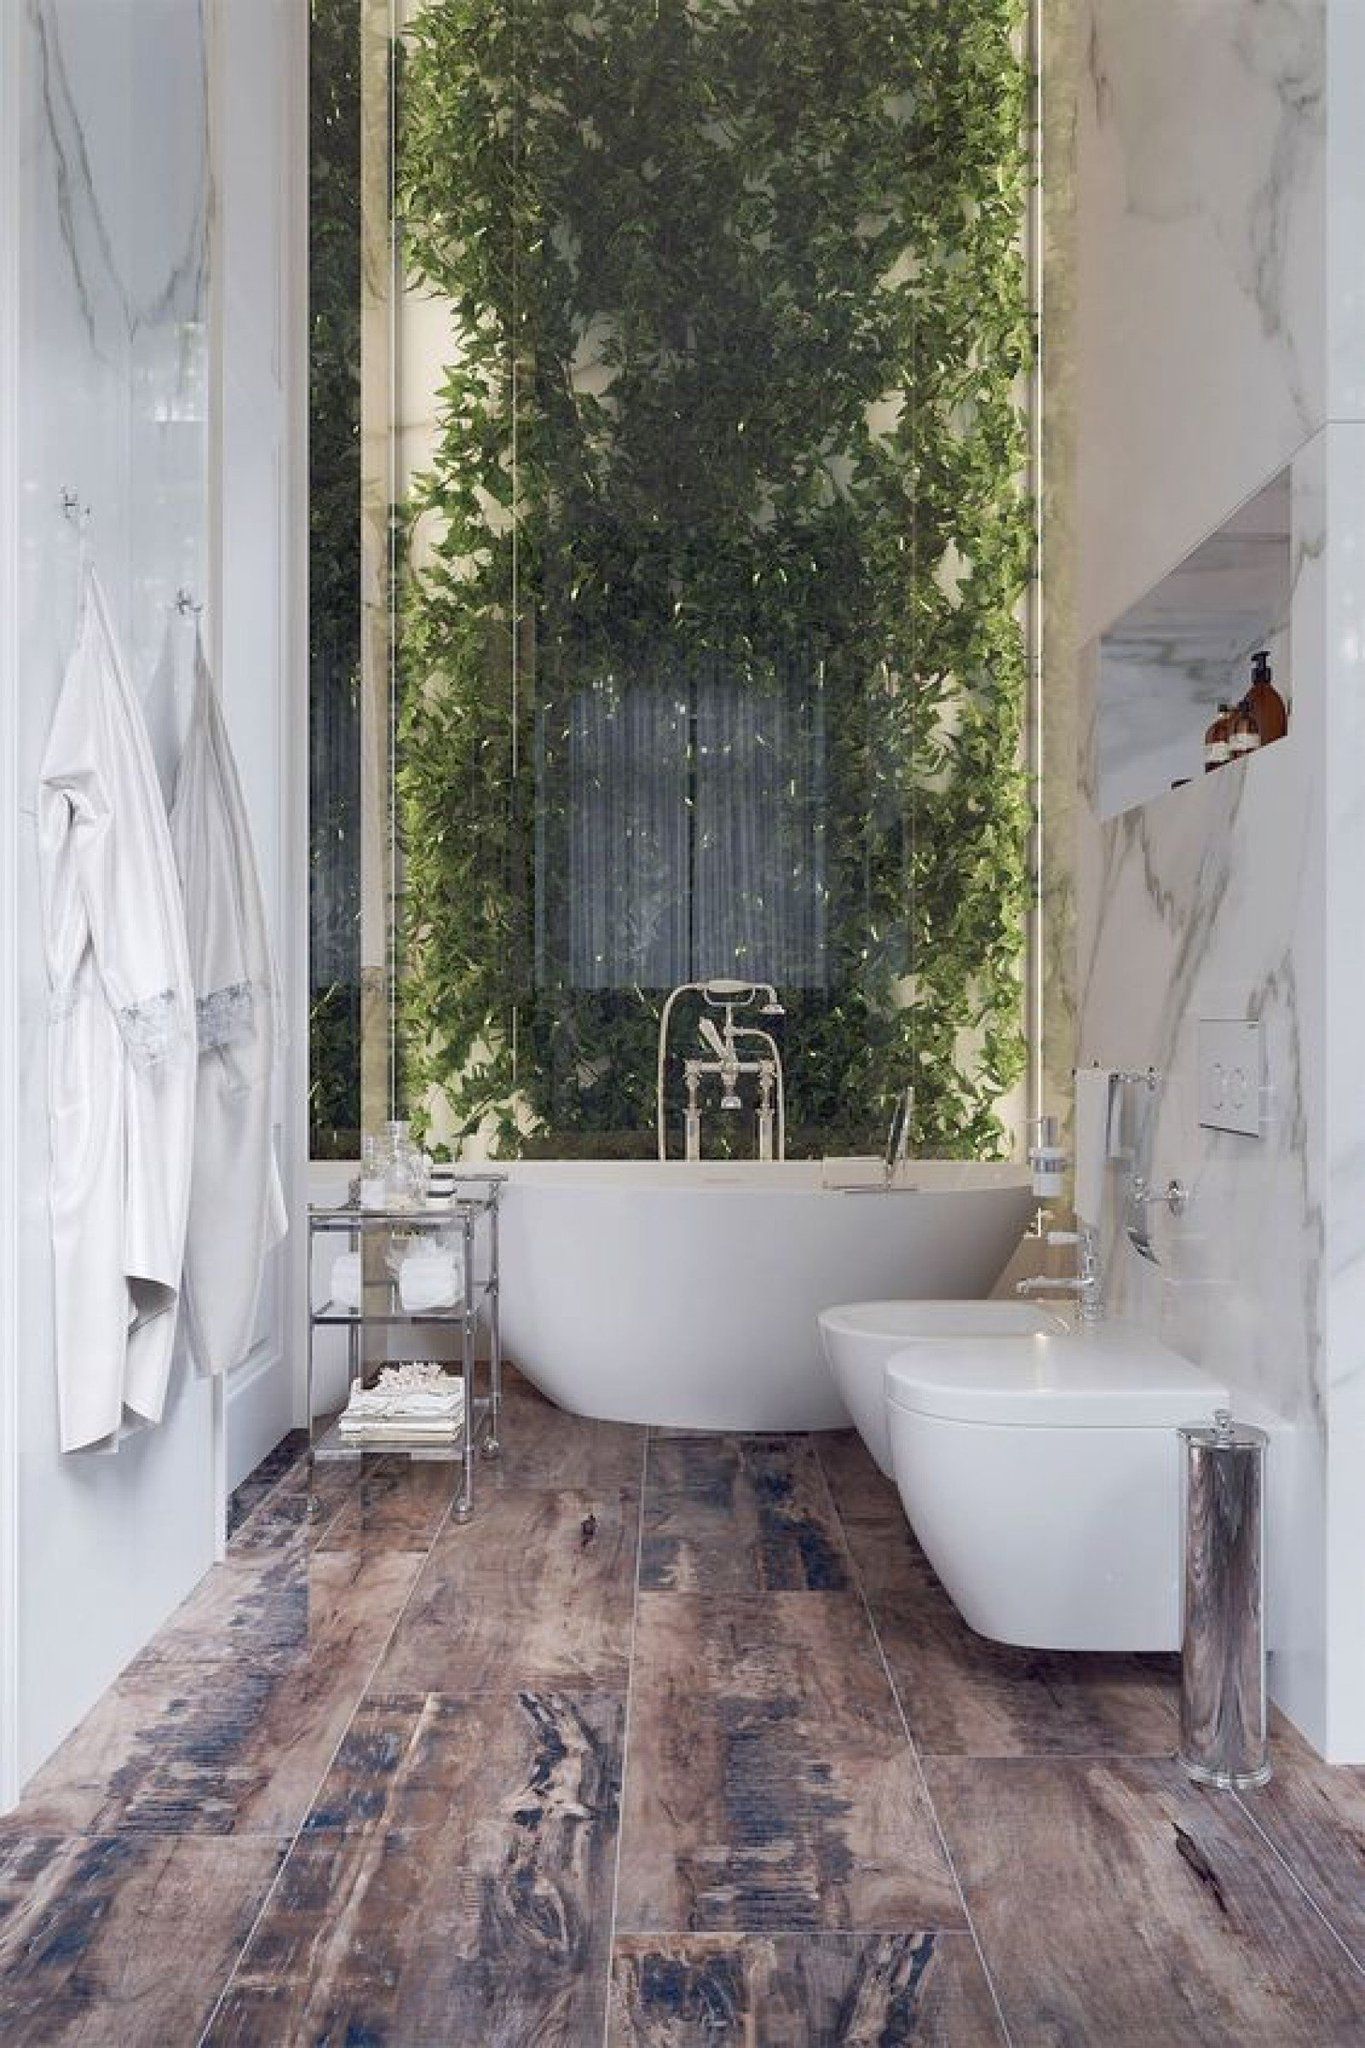 Bathroom with Refreshing Natural Decoration